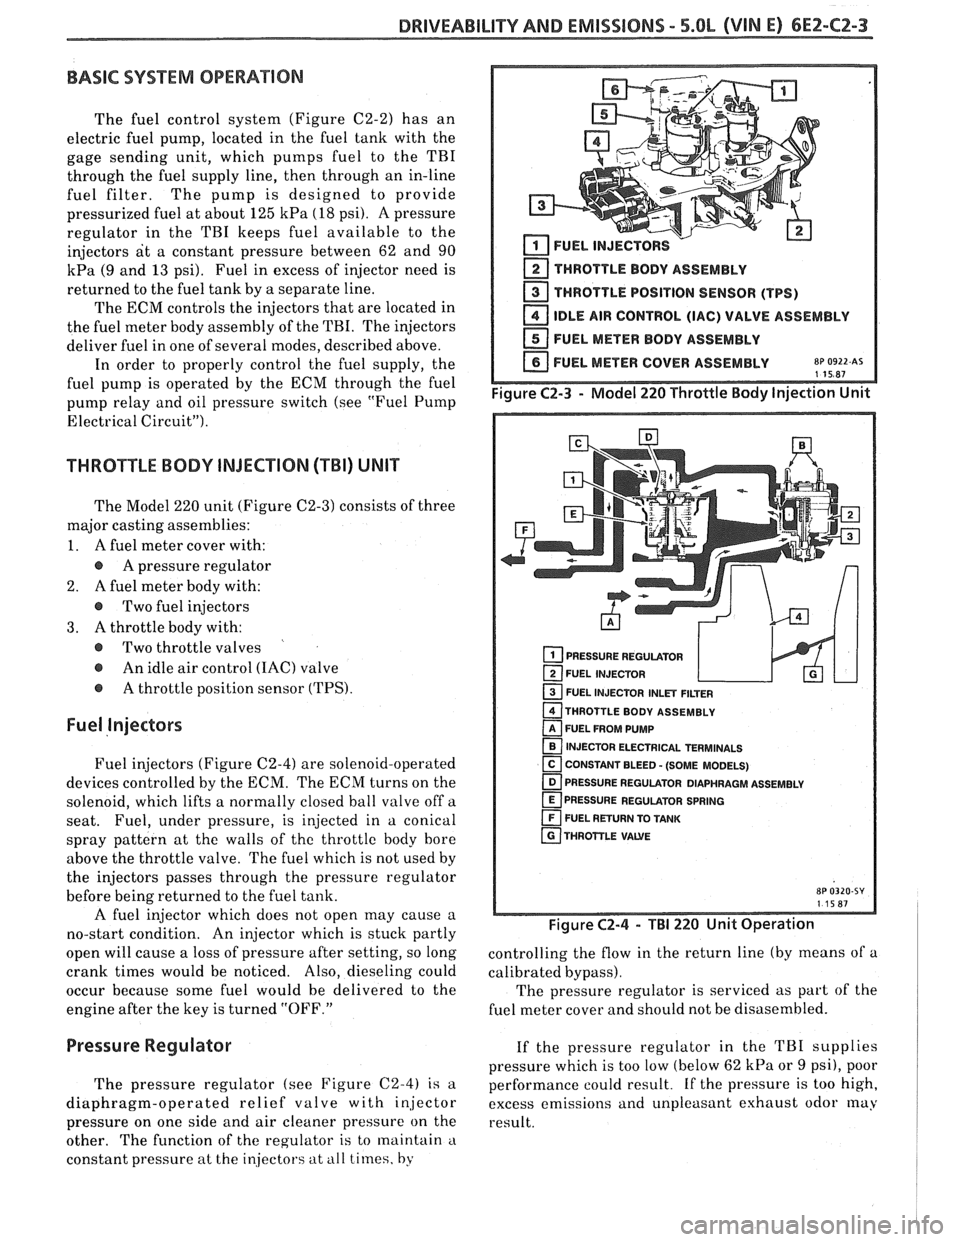 PONTIAC FIERO 1988  Service Service Manual 
DRIVEABILITY AND EMlSSlONS - 5.0L (VIN E) 6E2-C2-3 
BASIC SYSTEM OPERATION 
The fuel  control  system (Figure C2-2) has an 
electric  fuel pump,  located  in the  fuel  tank  with the 
gage  sending 